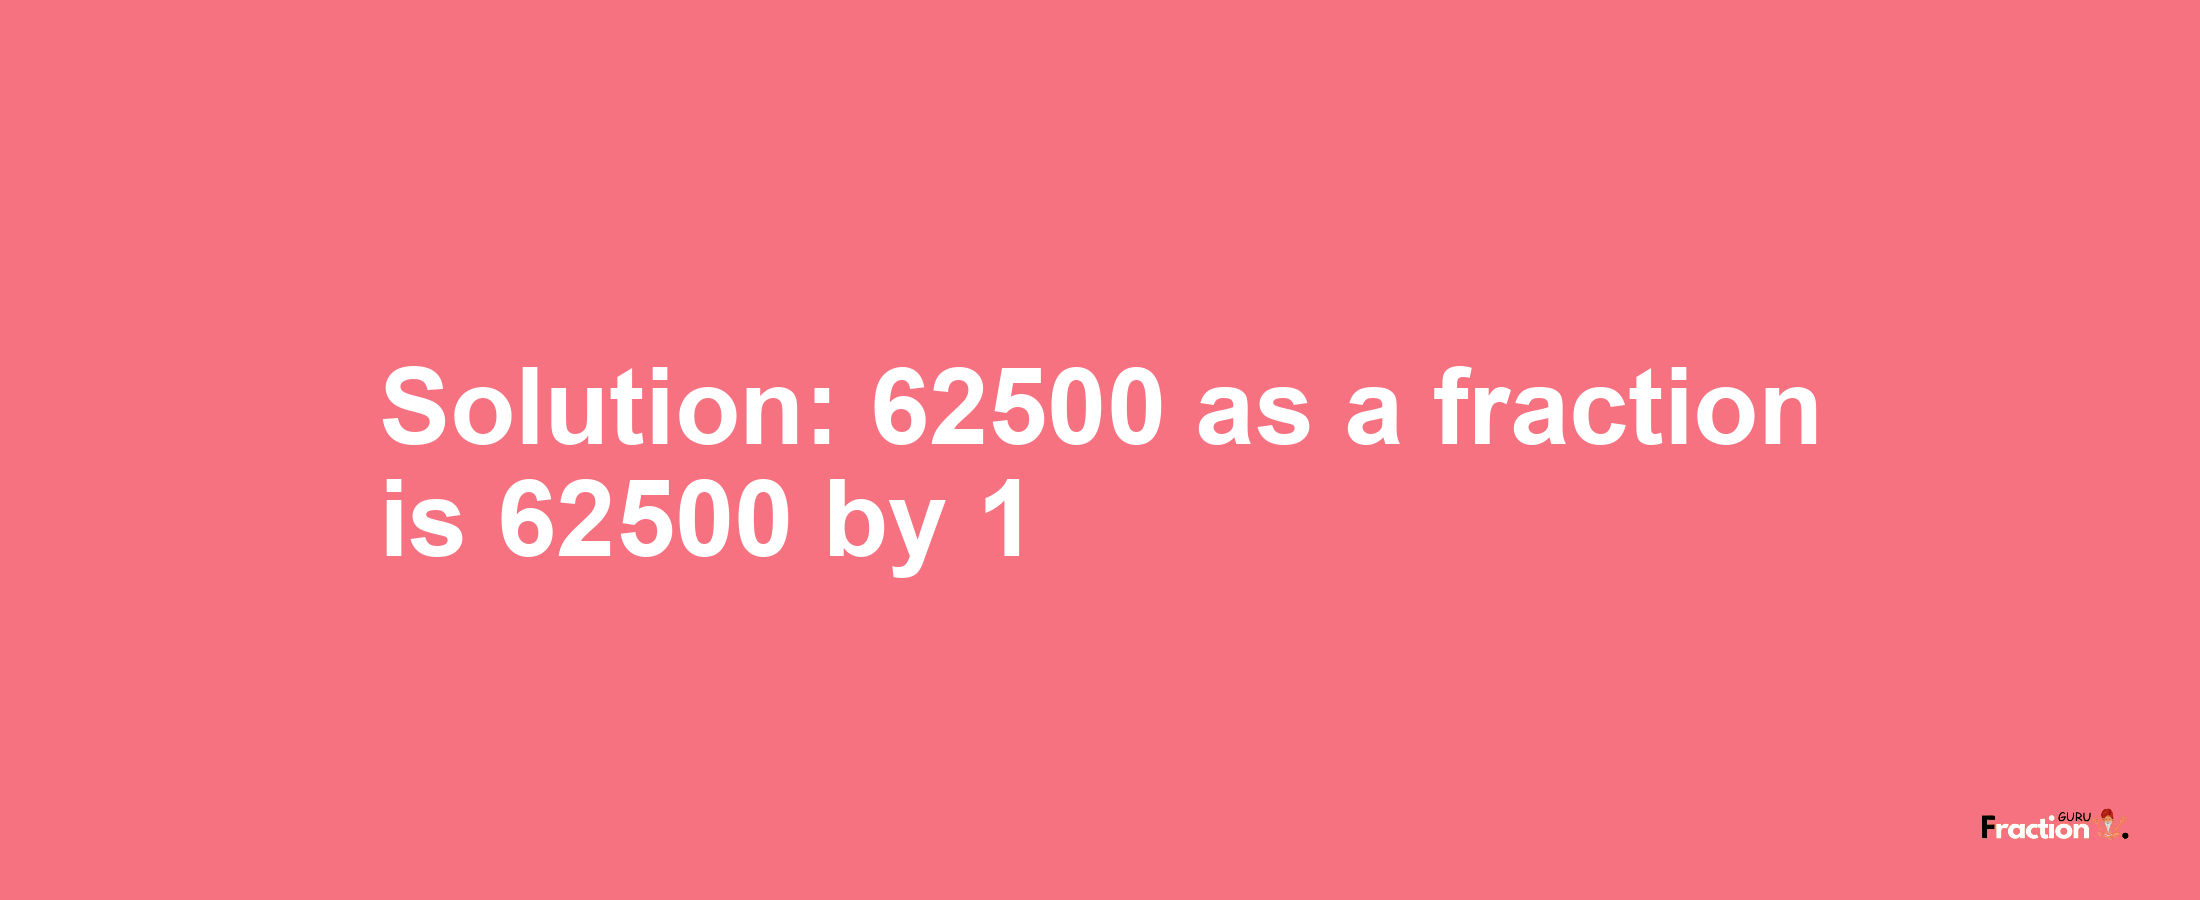 Solution:62500 as a fraction is 62500/1